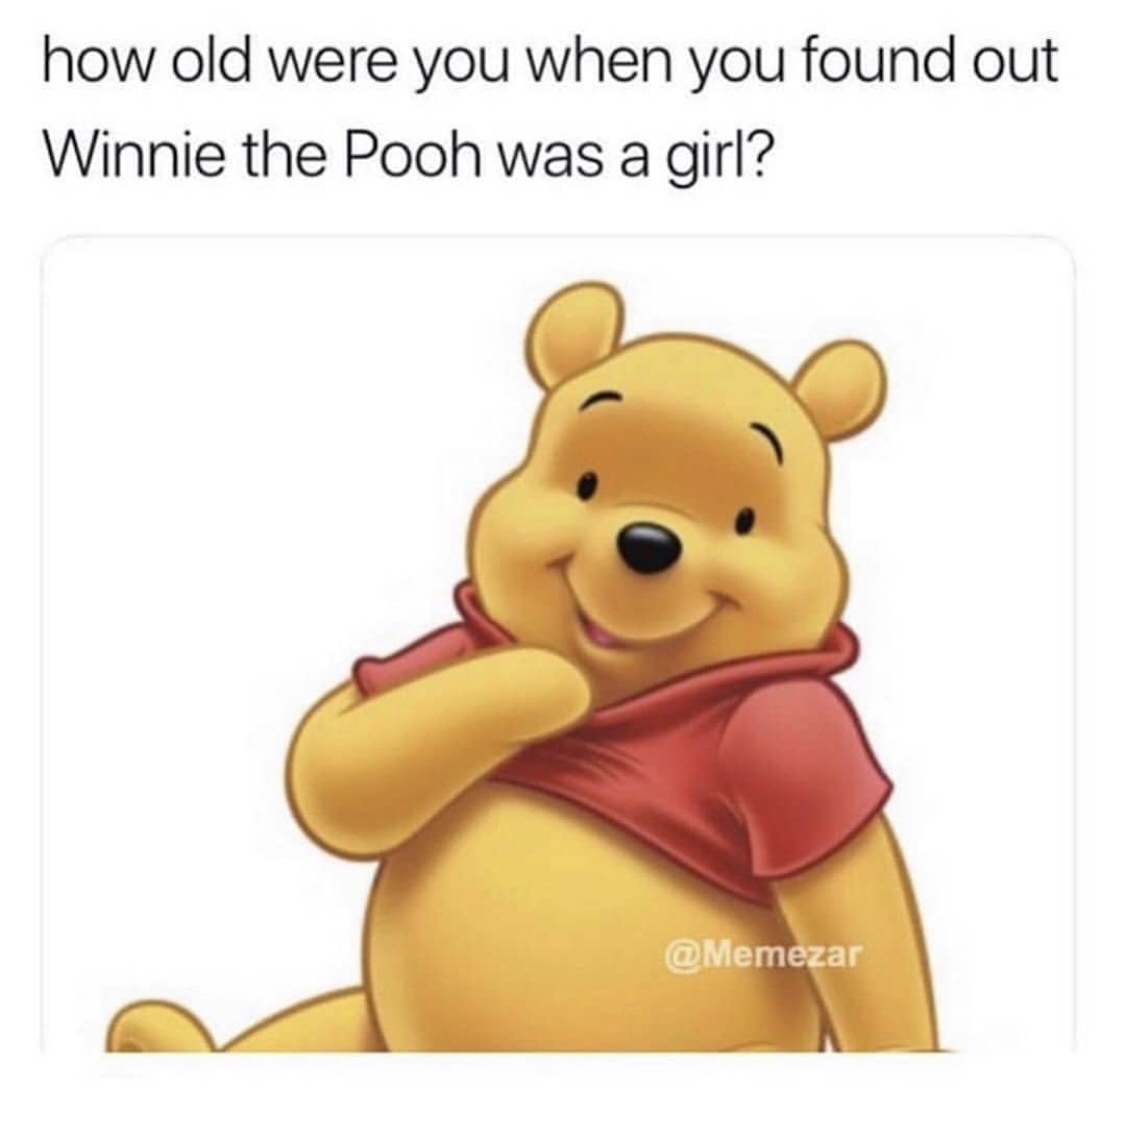 winnie the pooh with a dick - how old were you when you found out Winnie th...